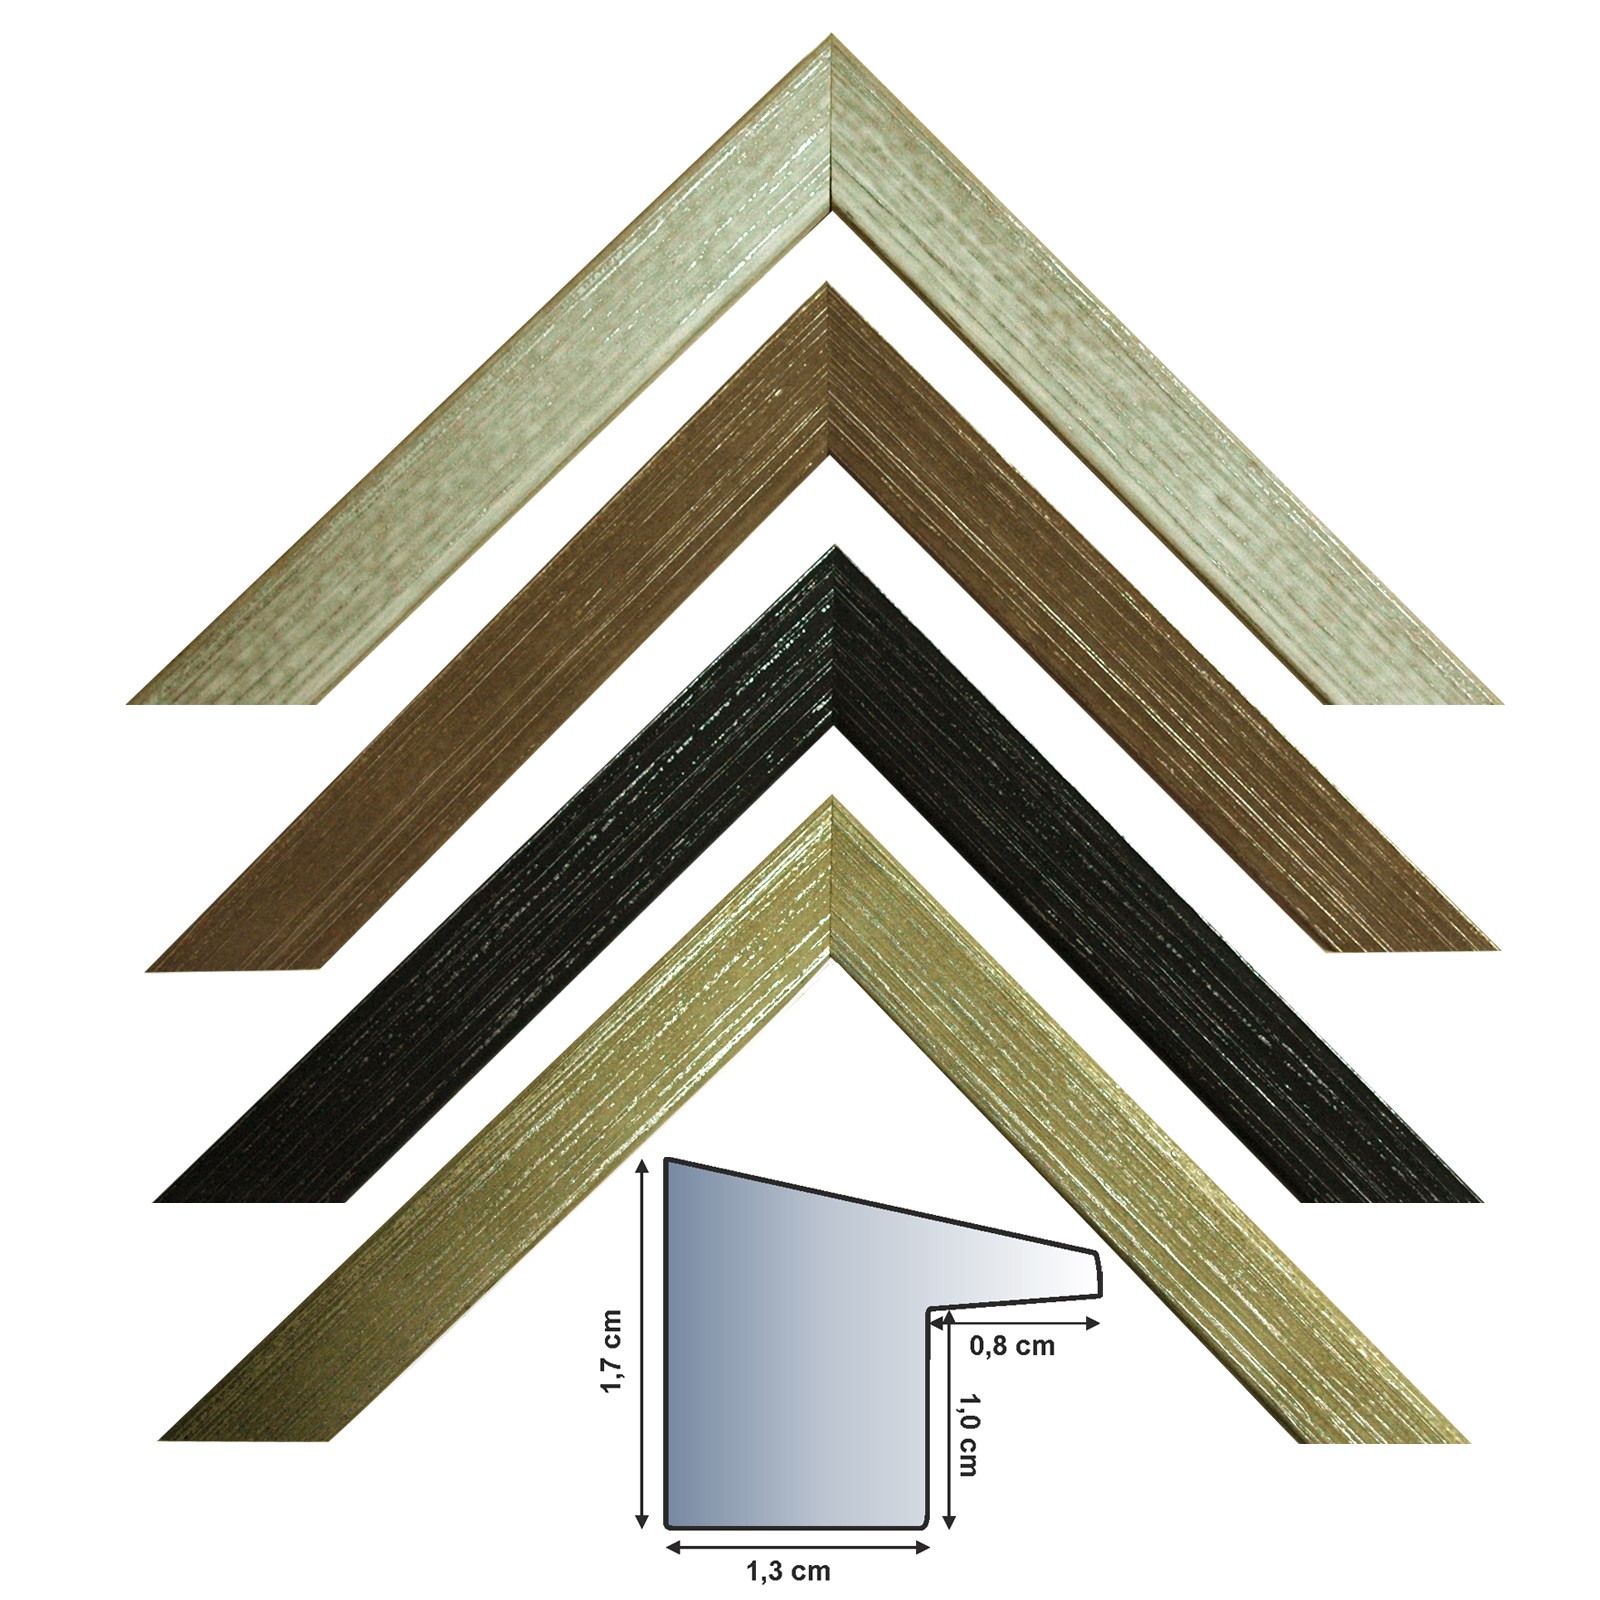  Picture frame series 2443 in black, marrone, gray and white, 20 mm high and 30 mm wide